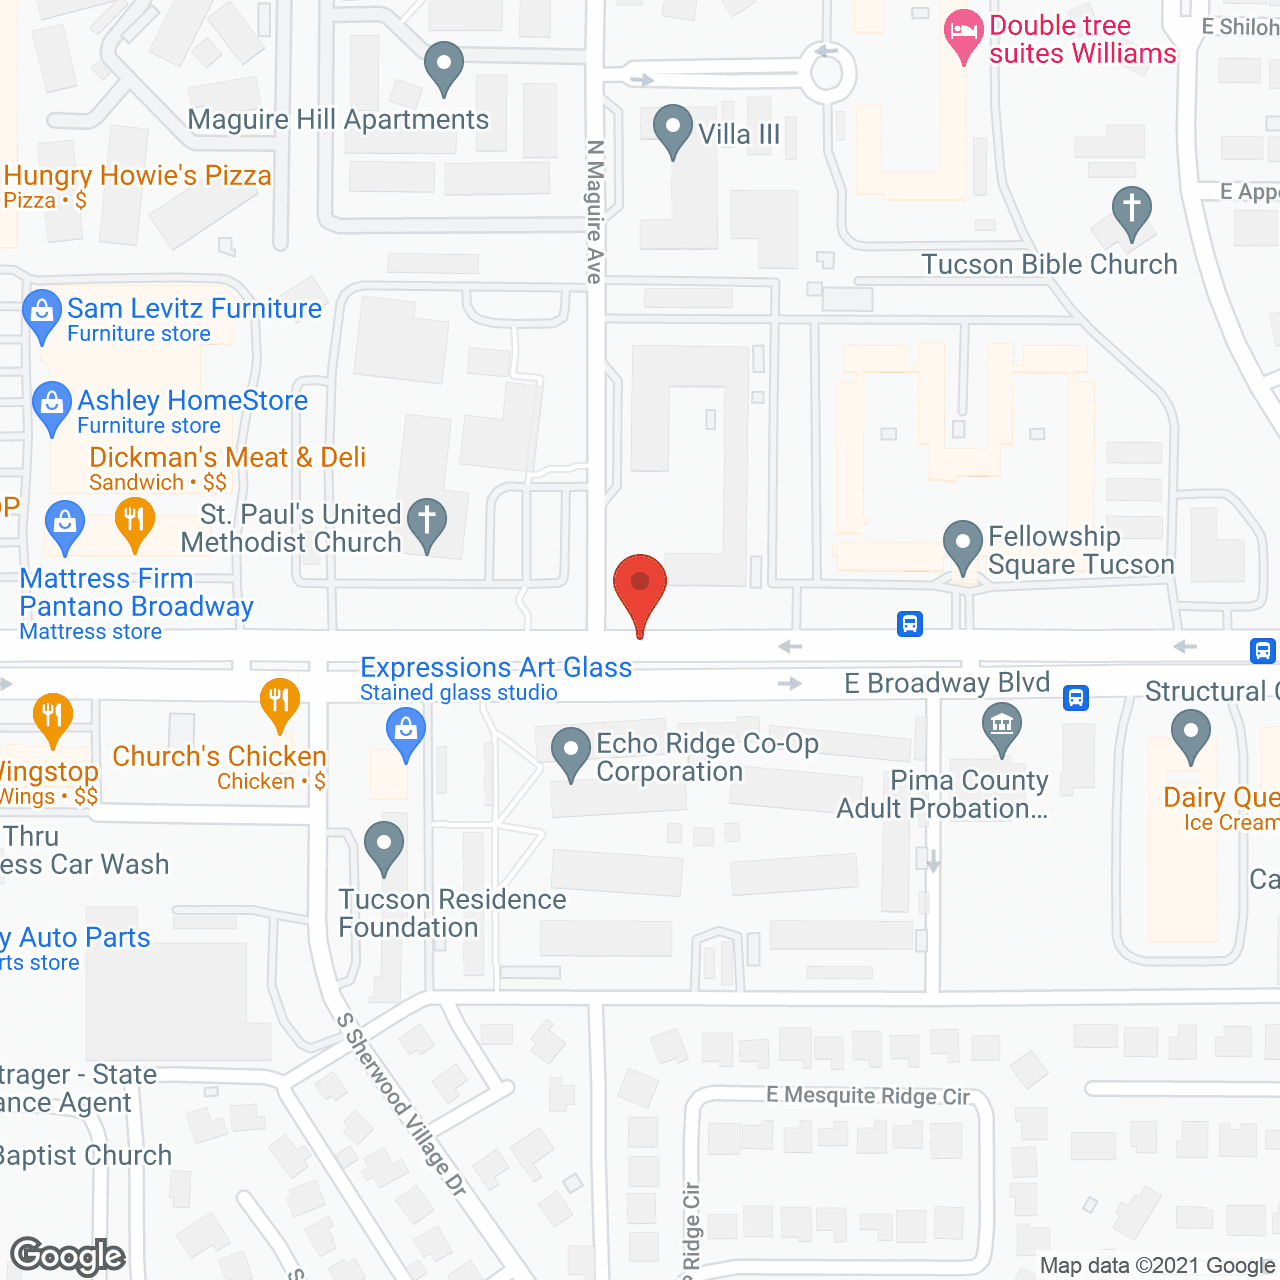 Fellowship Square at Tucson in google map